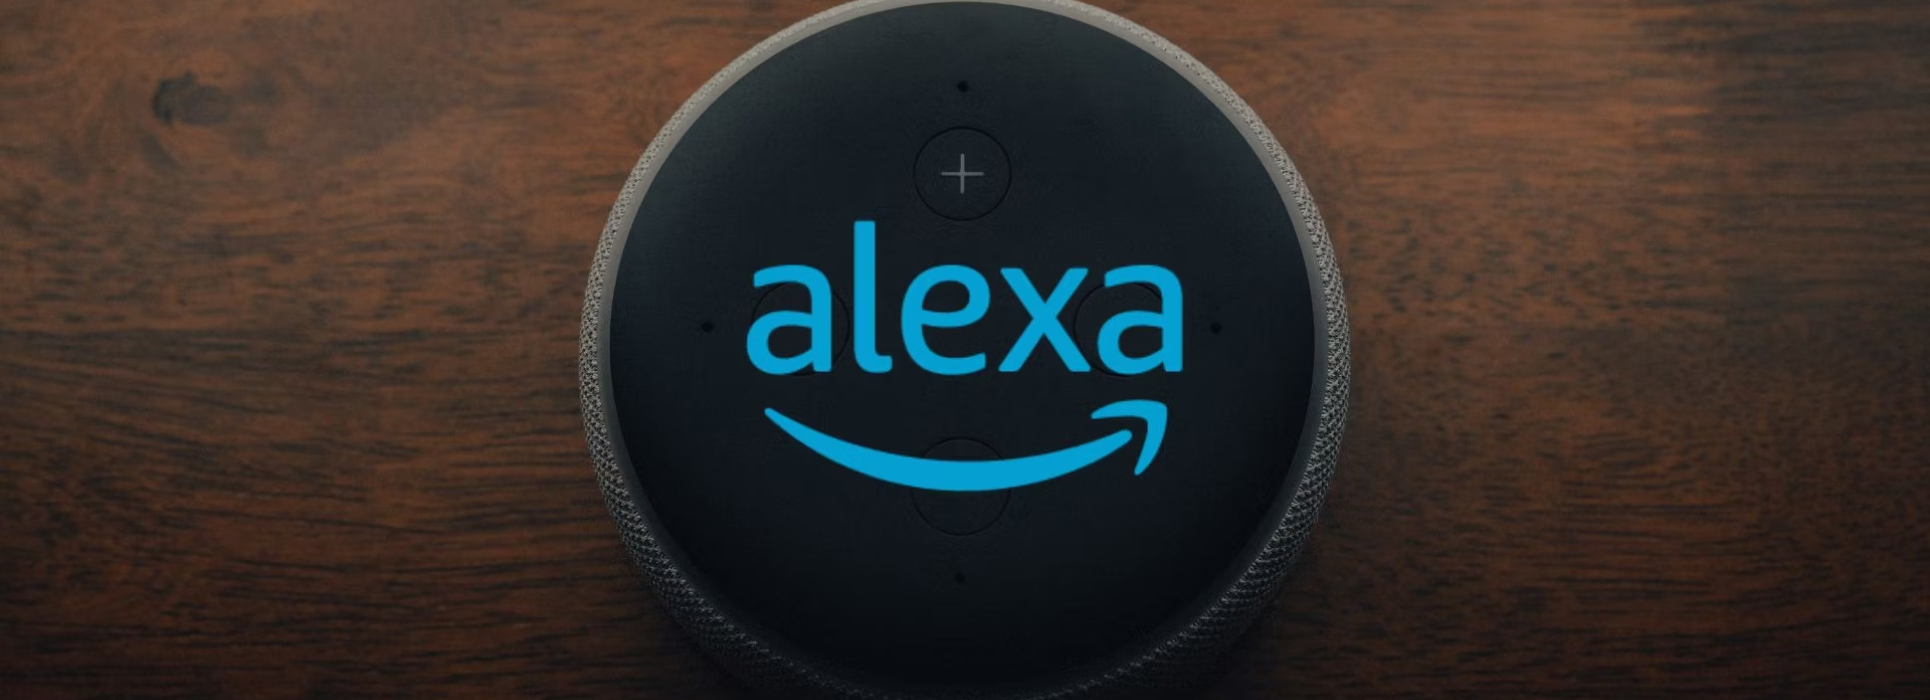 How to Control Lights with Alexa - Alexa Smart Lights Guide